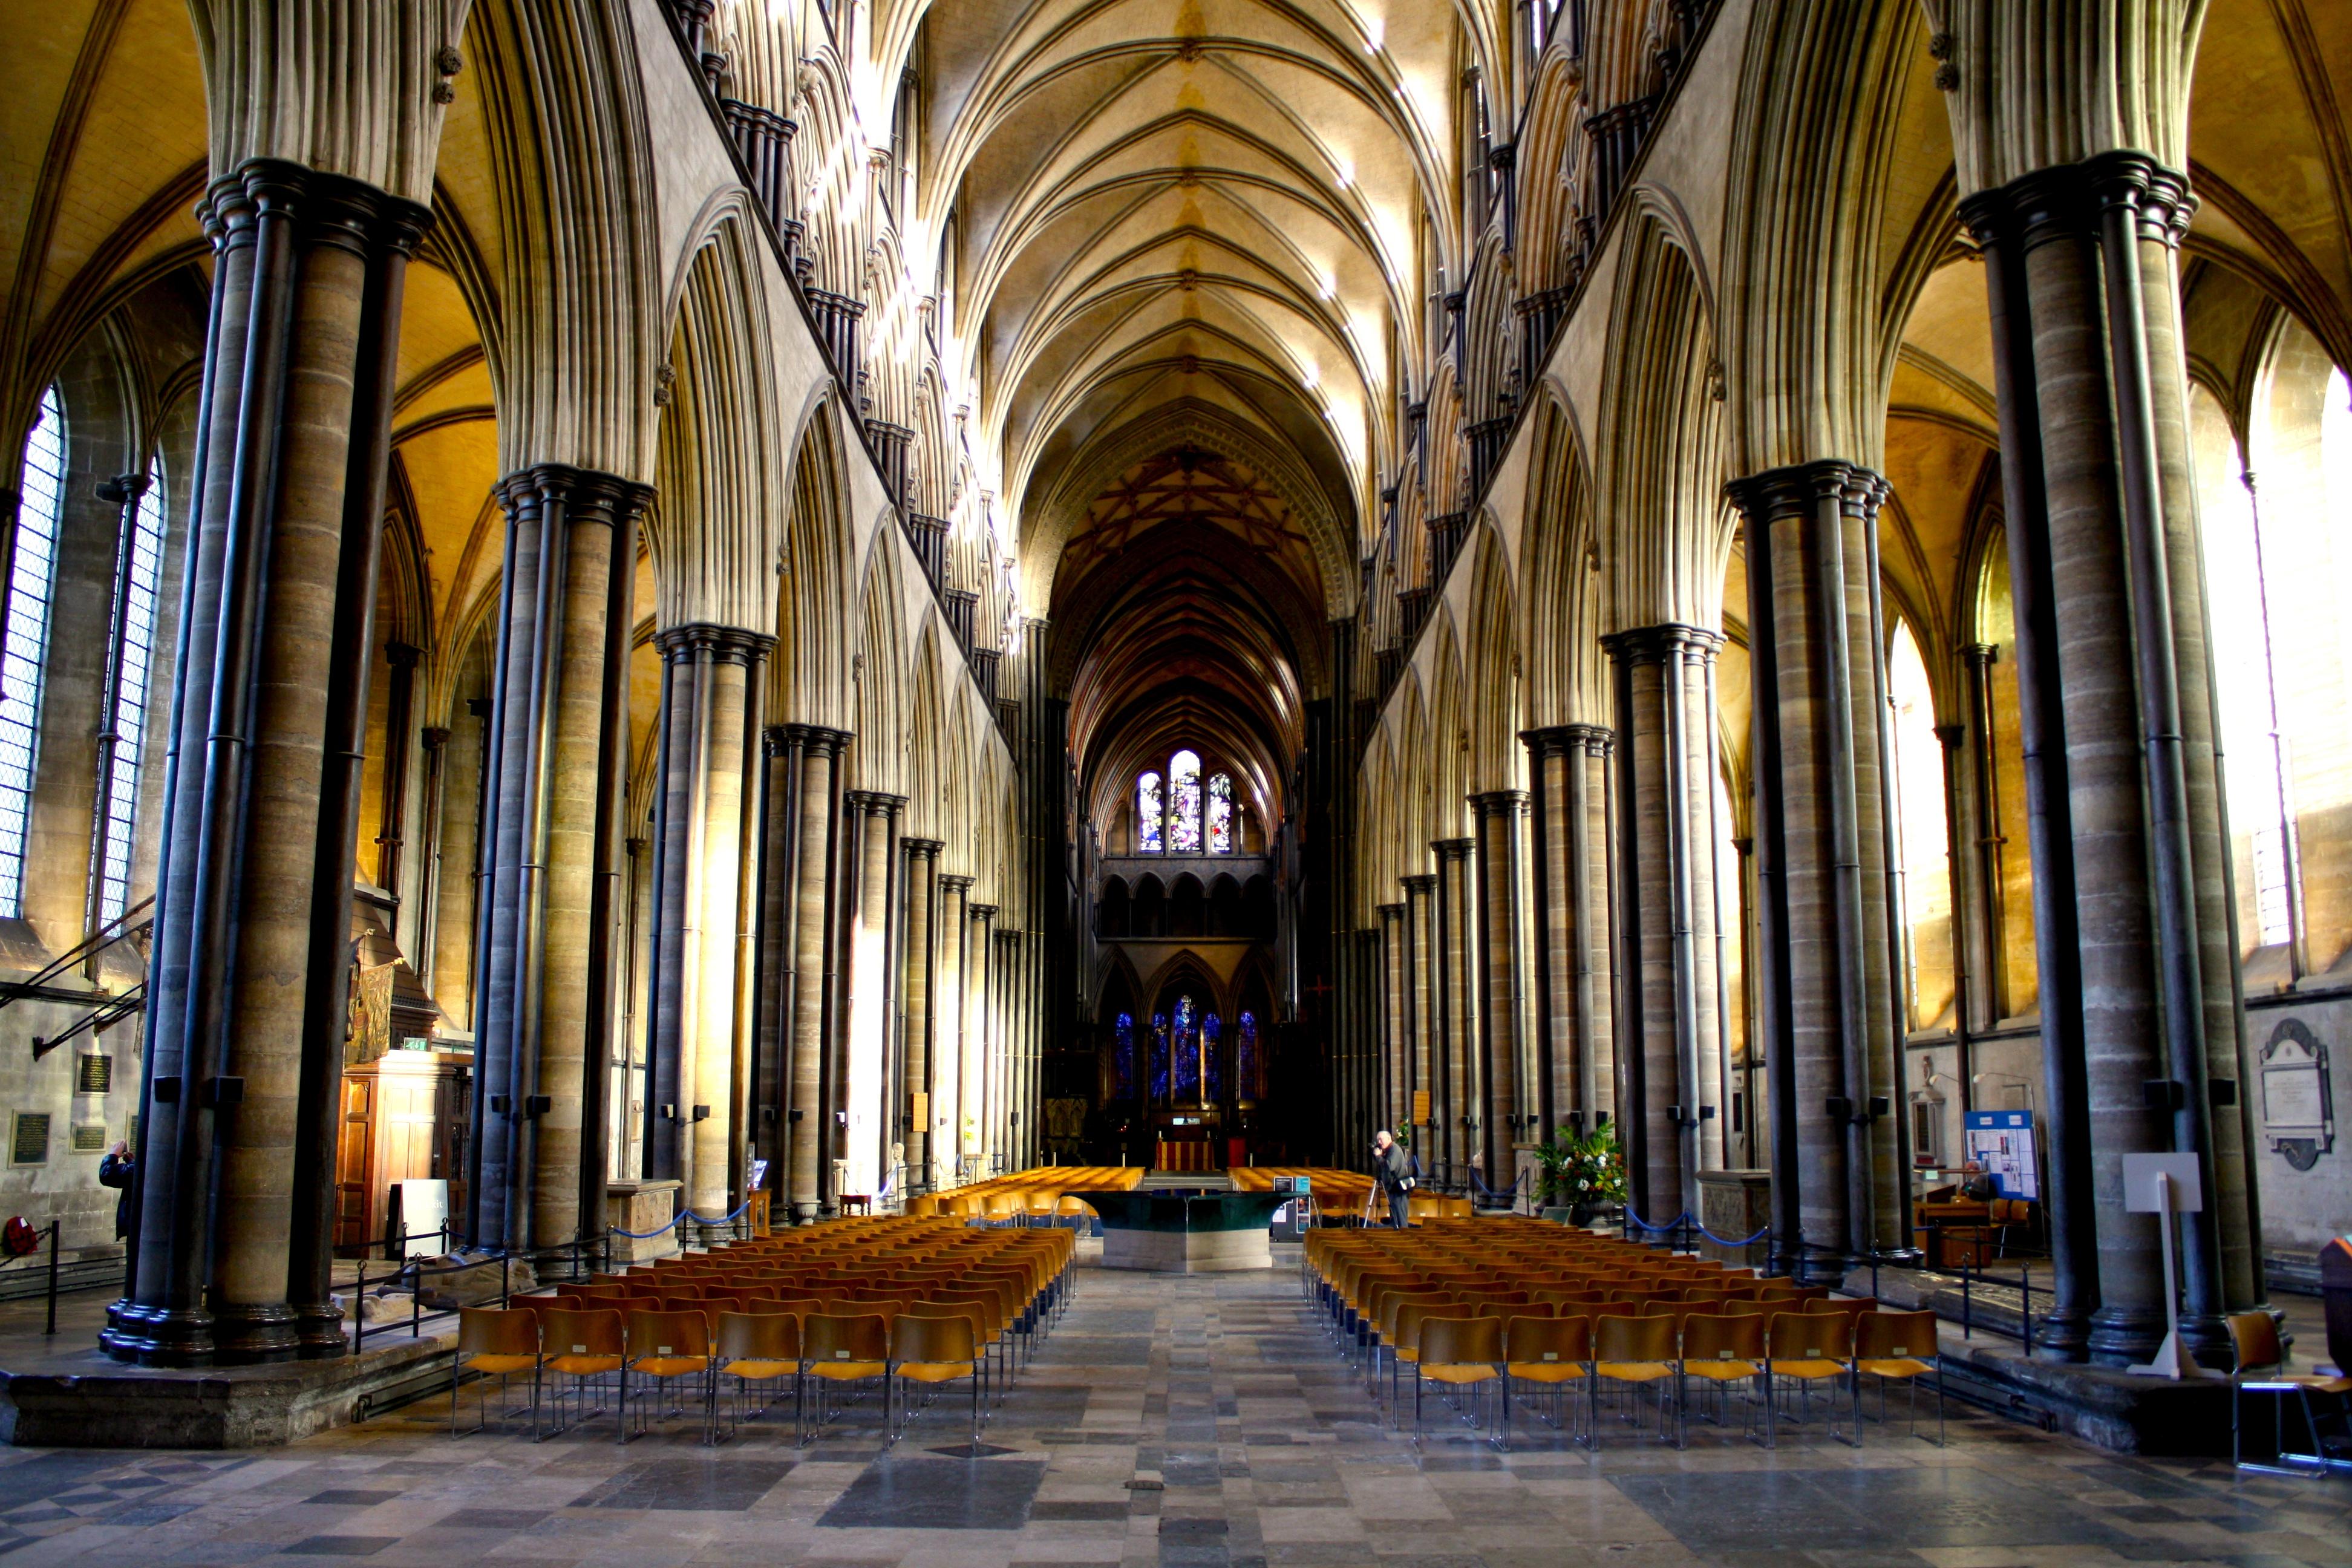 Sunday Photo: A Lovely Photo of Salisbury Cathedral For Your